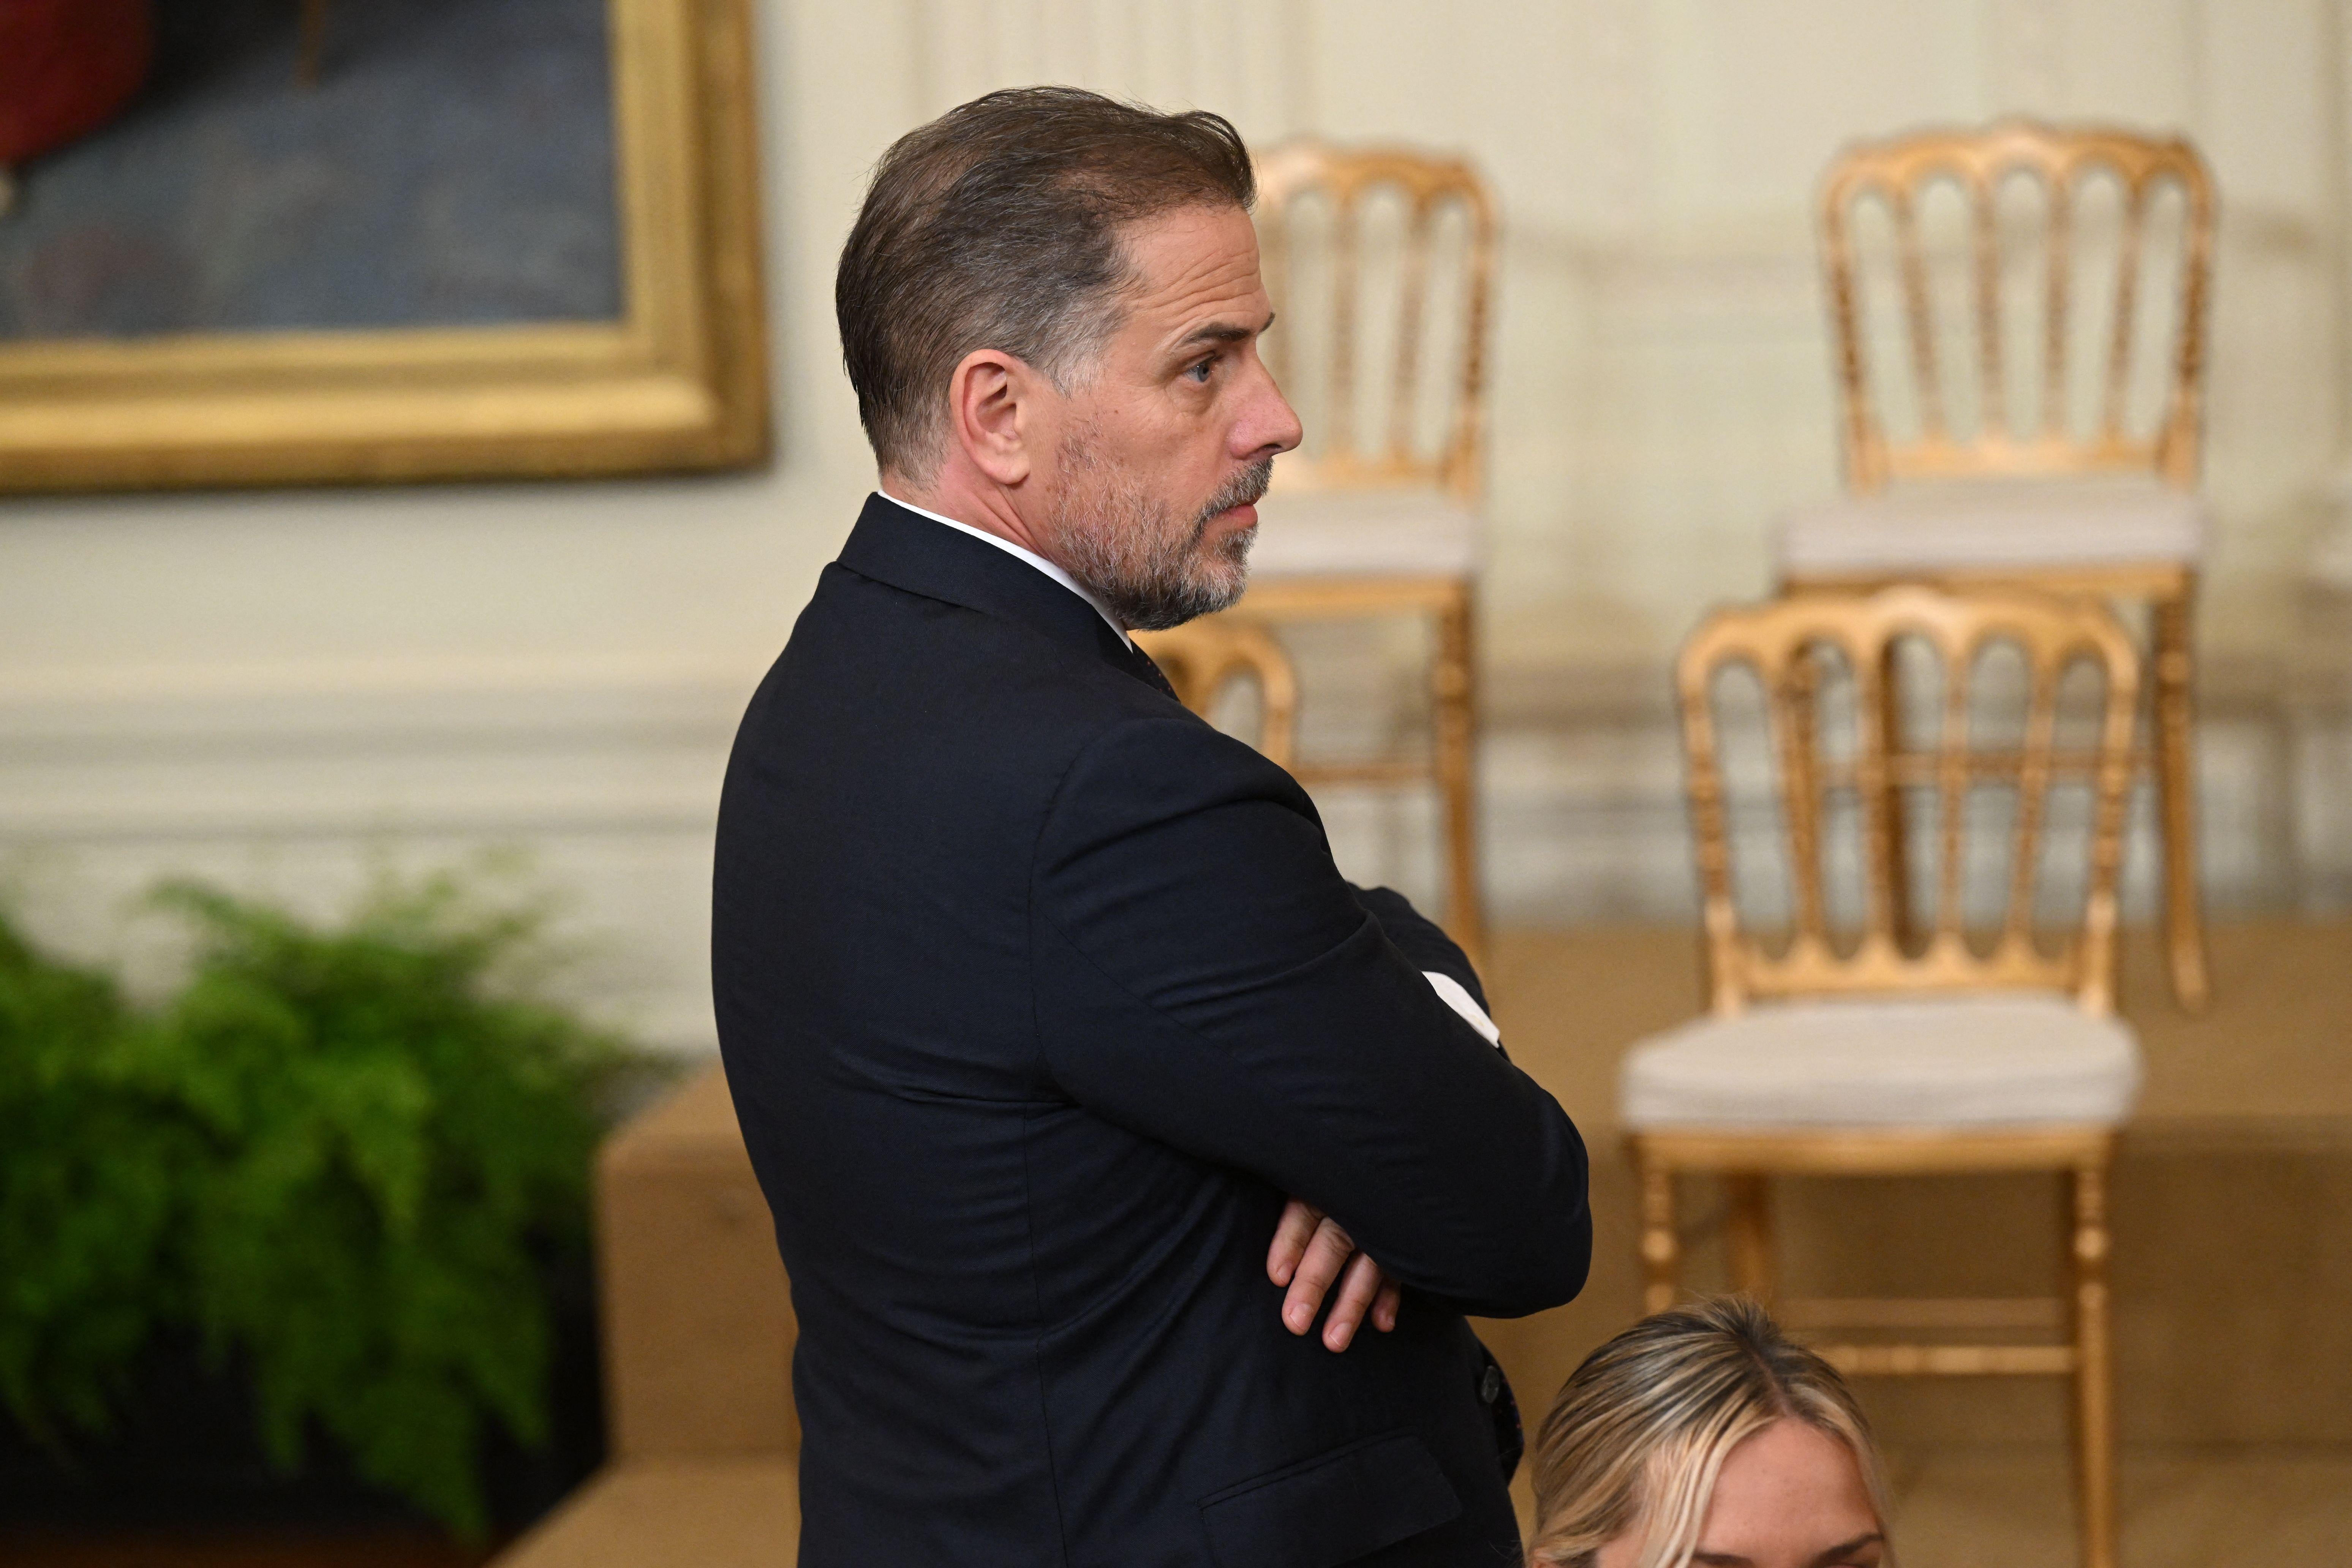 Hunter Biden, crossing his arms, is seen from his right profile.